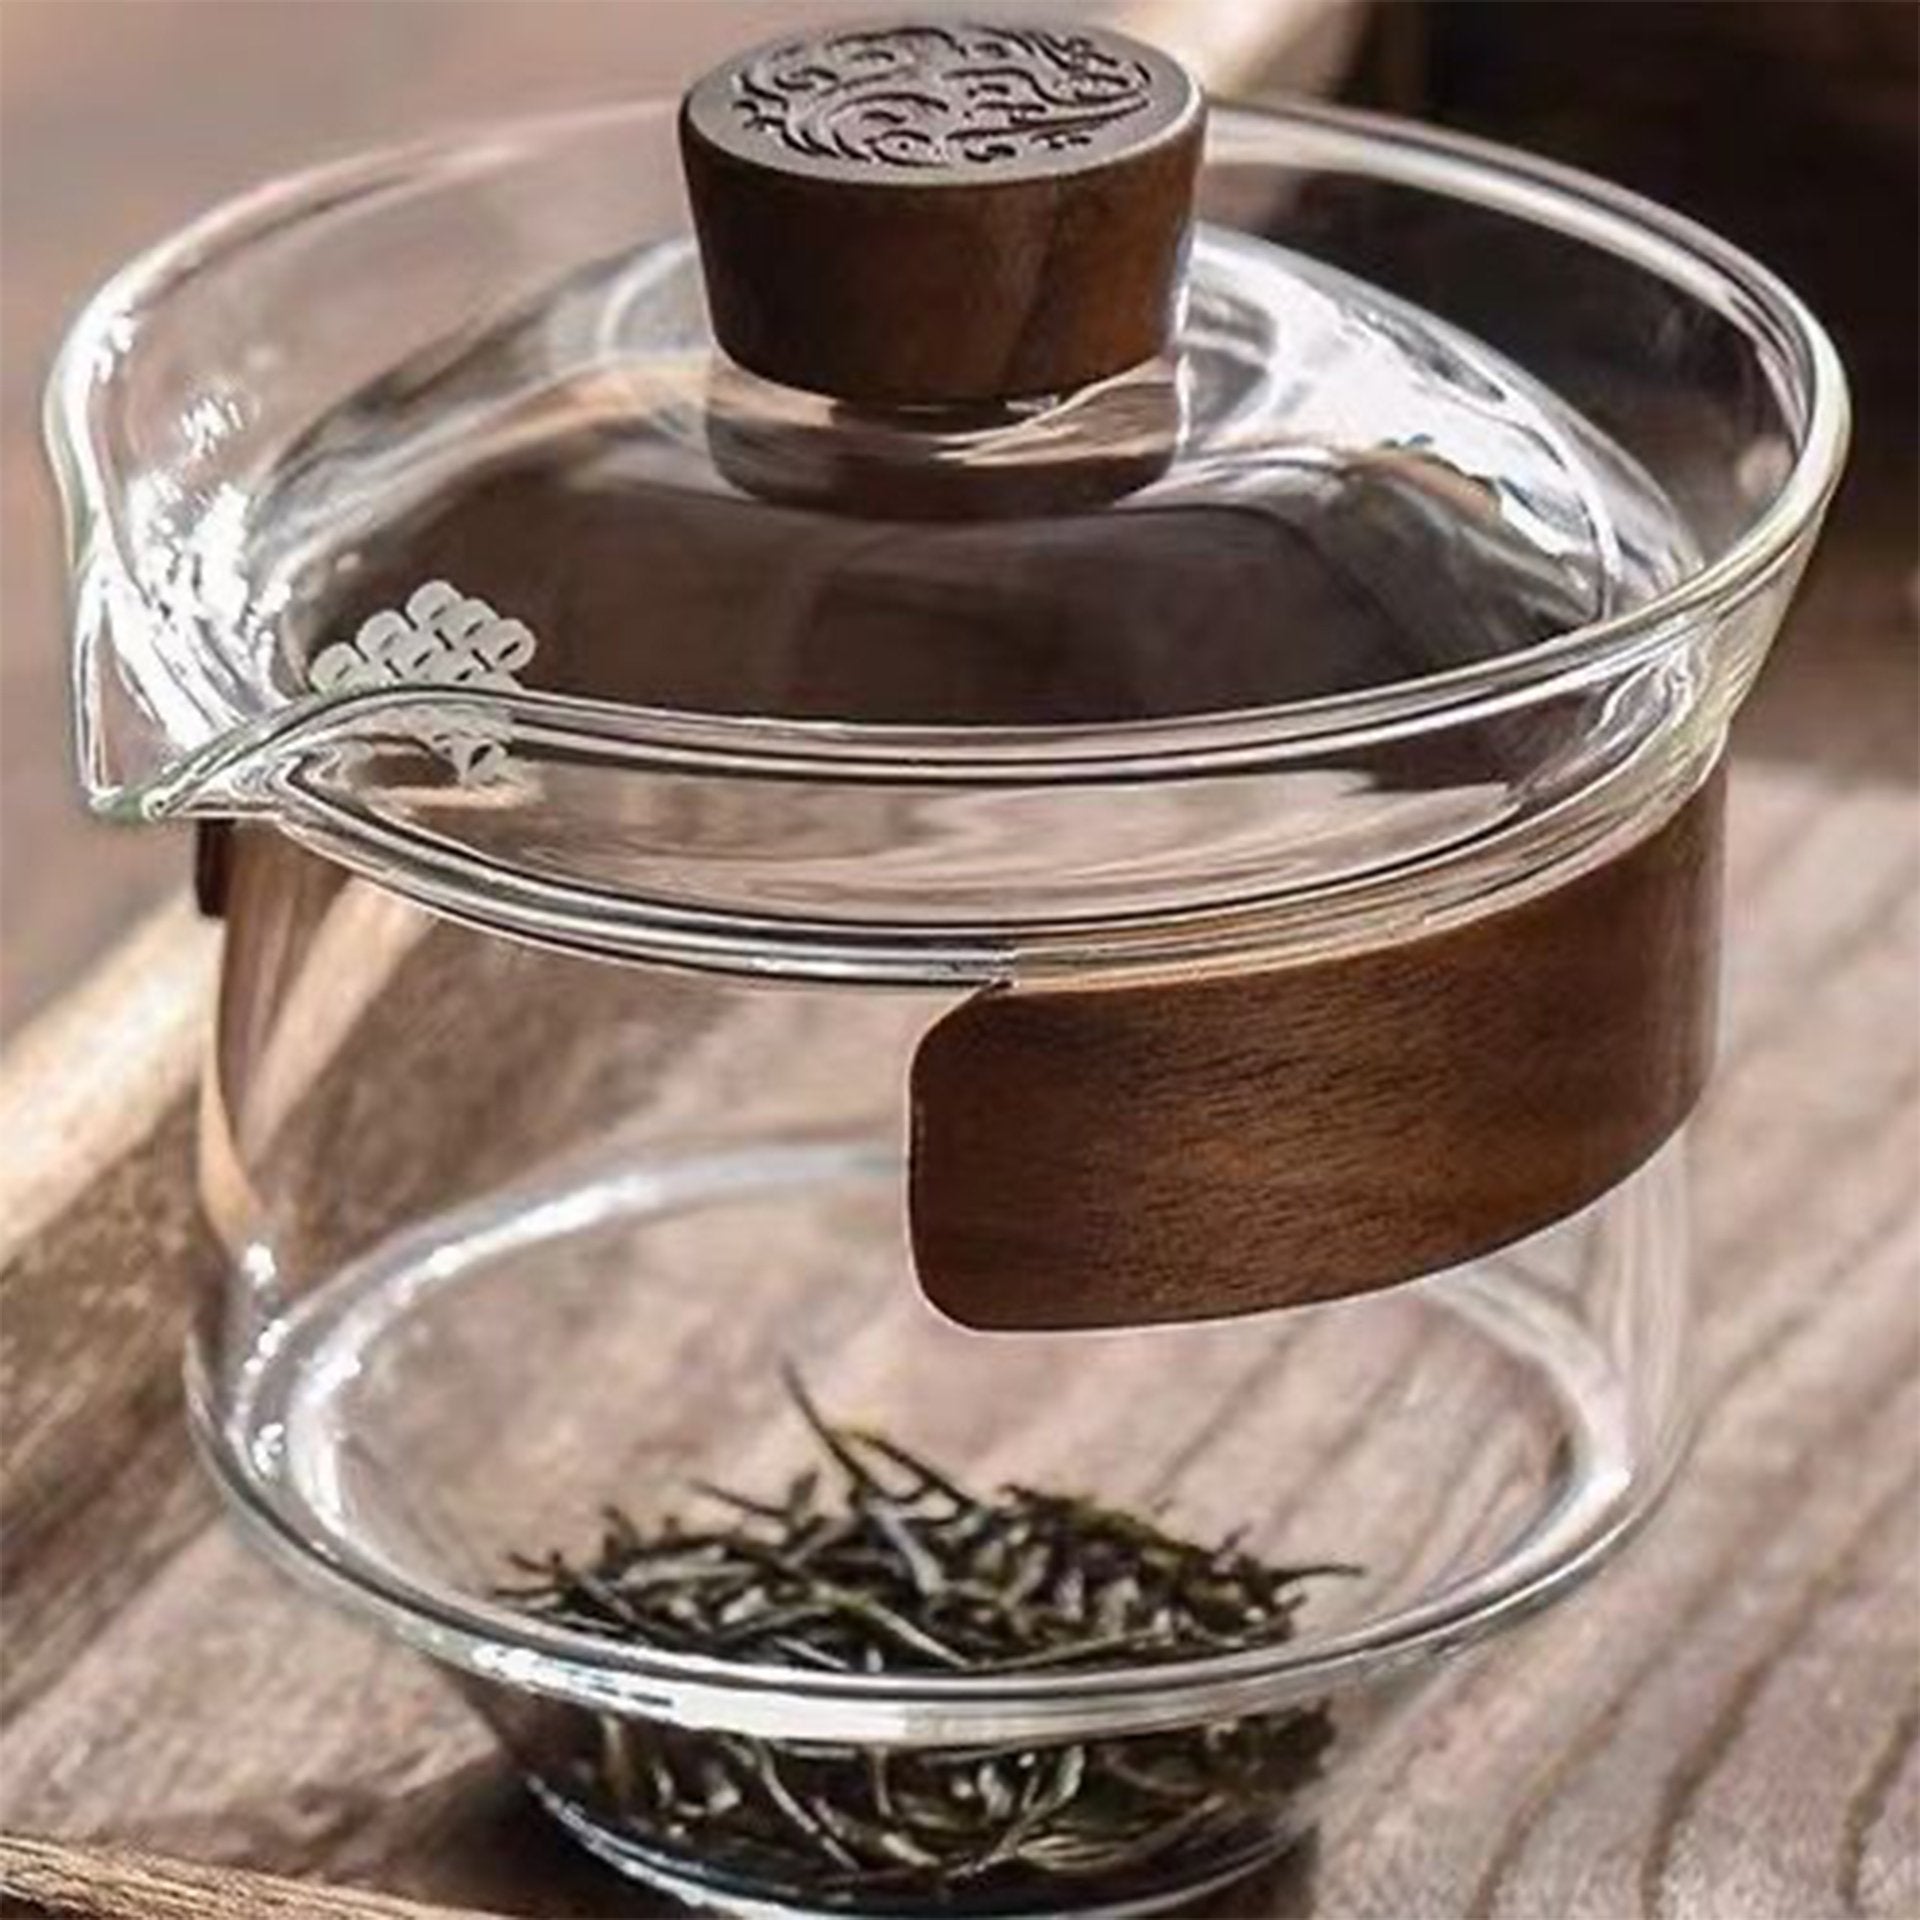 Transparent glass teapot with wooden handle and loose green tea leaves